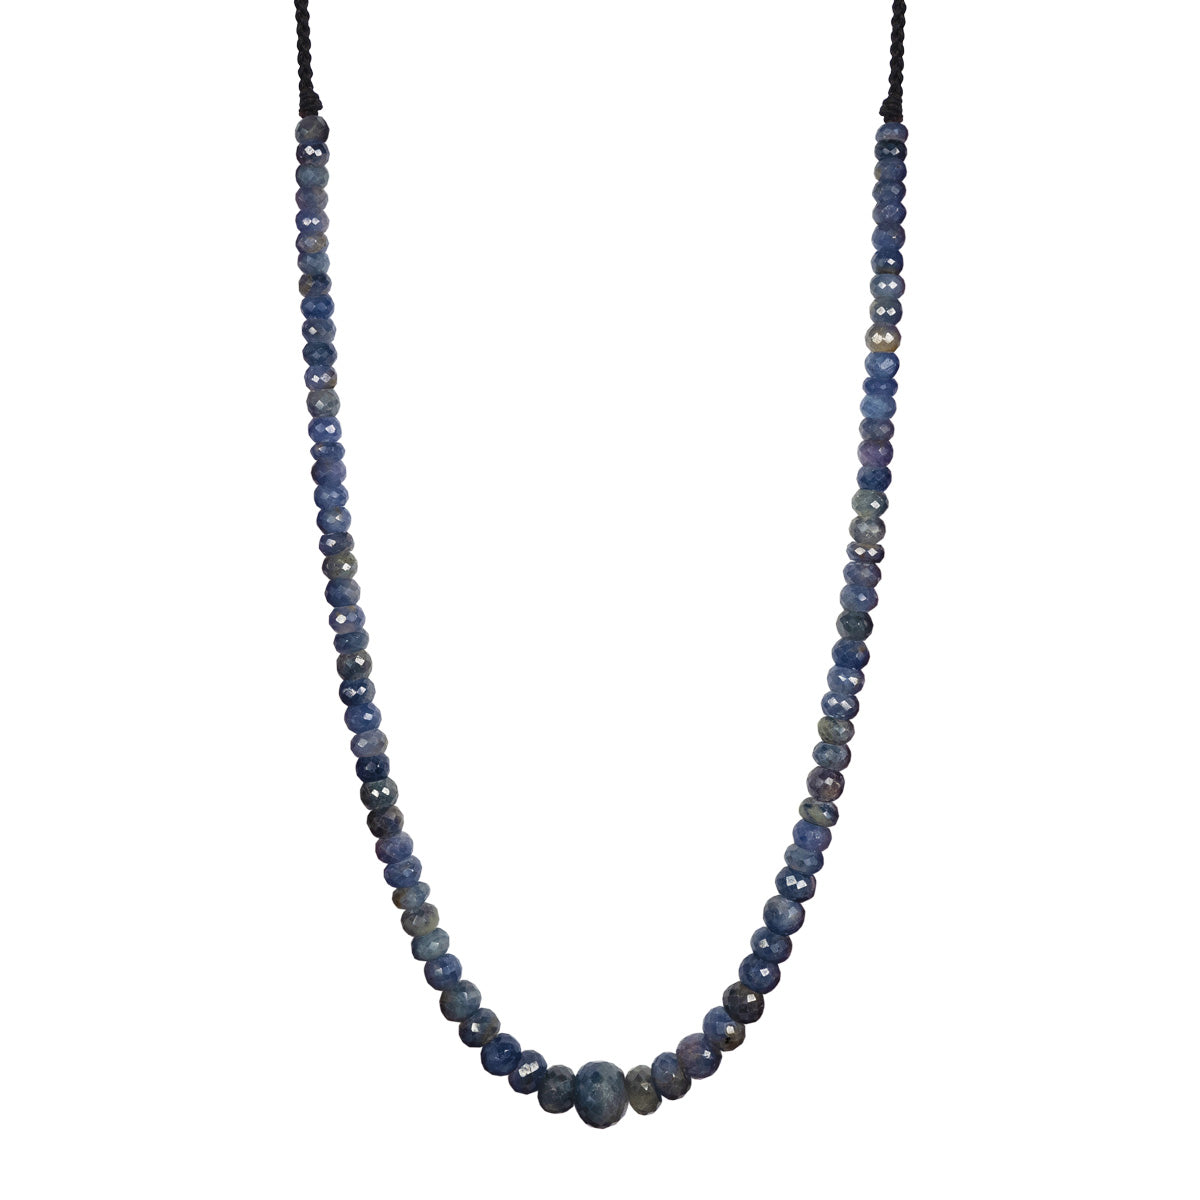 Natural Blue Sapphire Beads Necklace Calibre Sapphire & Yellow Gold Spacers  | eBay